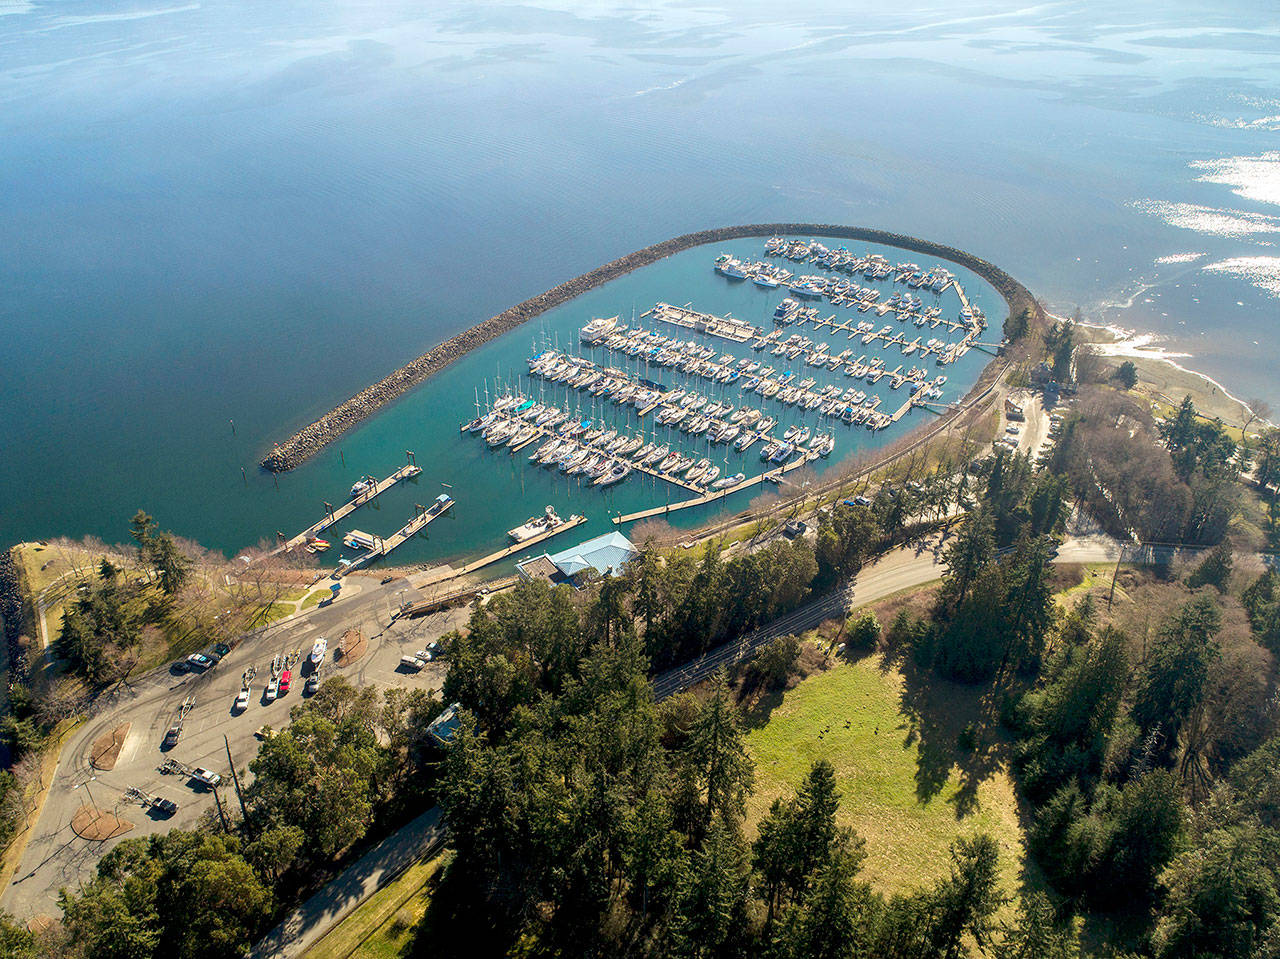 The future of the John Wayne Marina, seen here from the air, is under evaluation both by the city of Sequim and the Jamestown S’Klallam Tribe. Photo by John Gussman